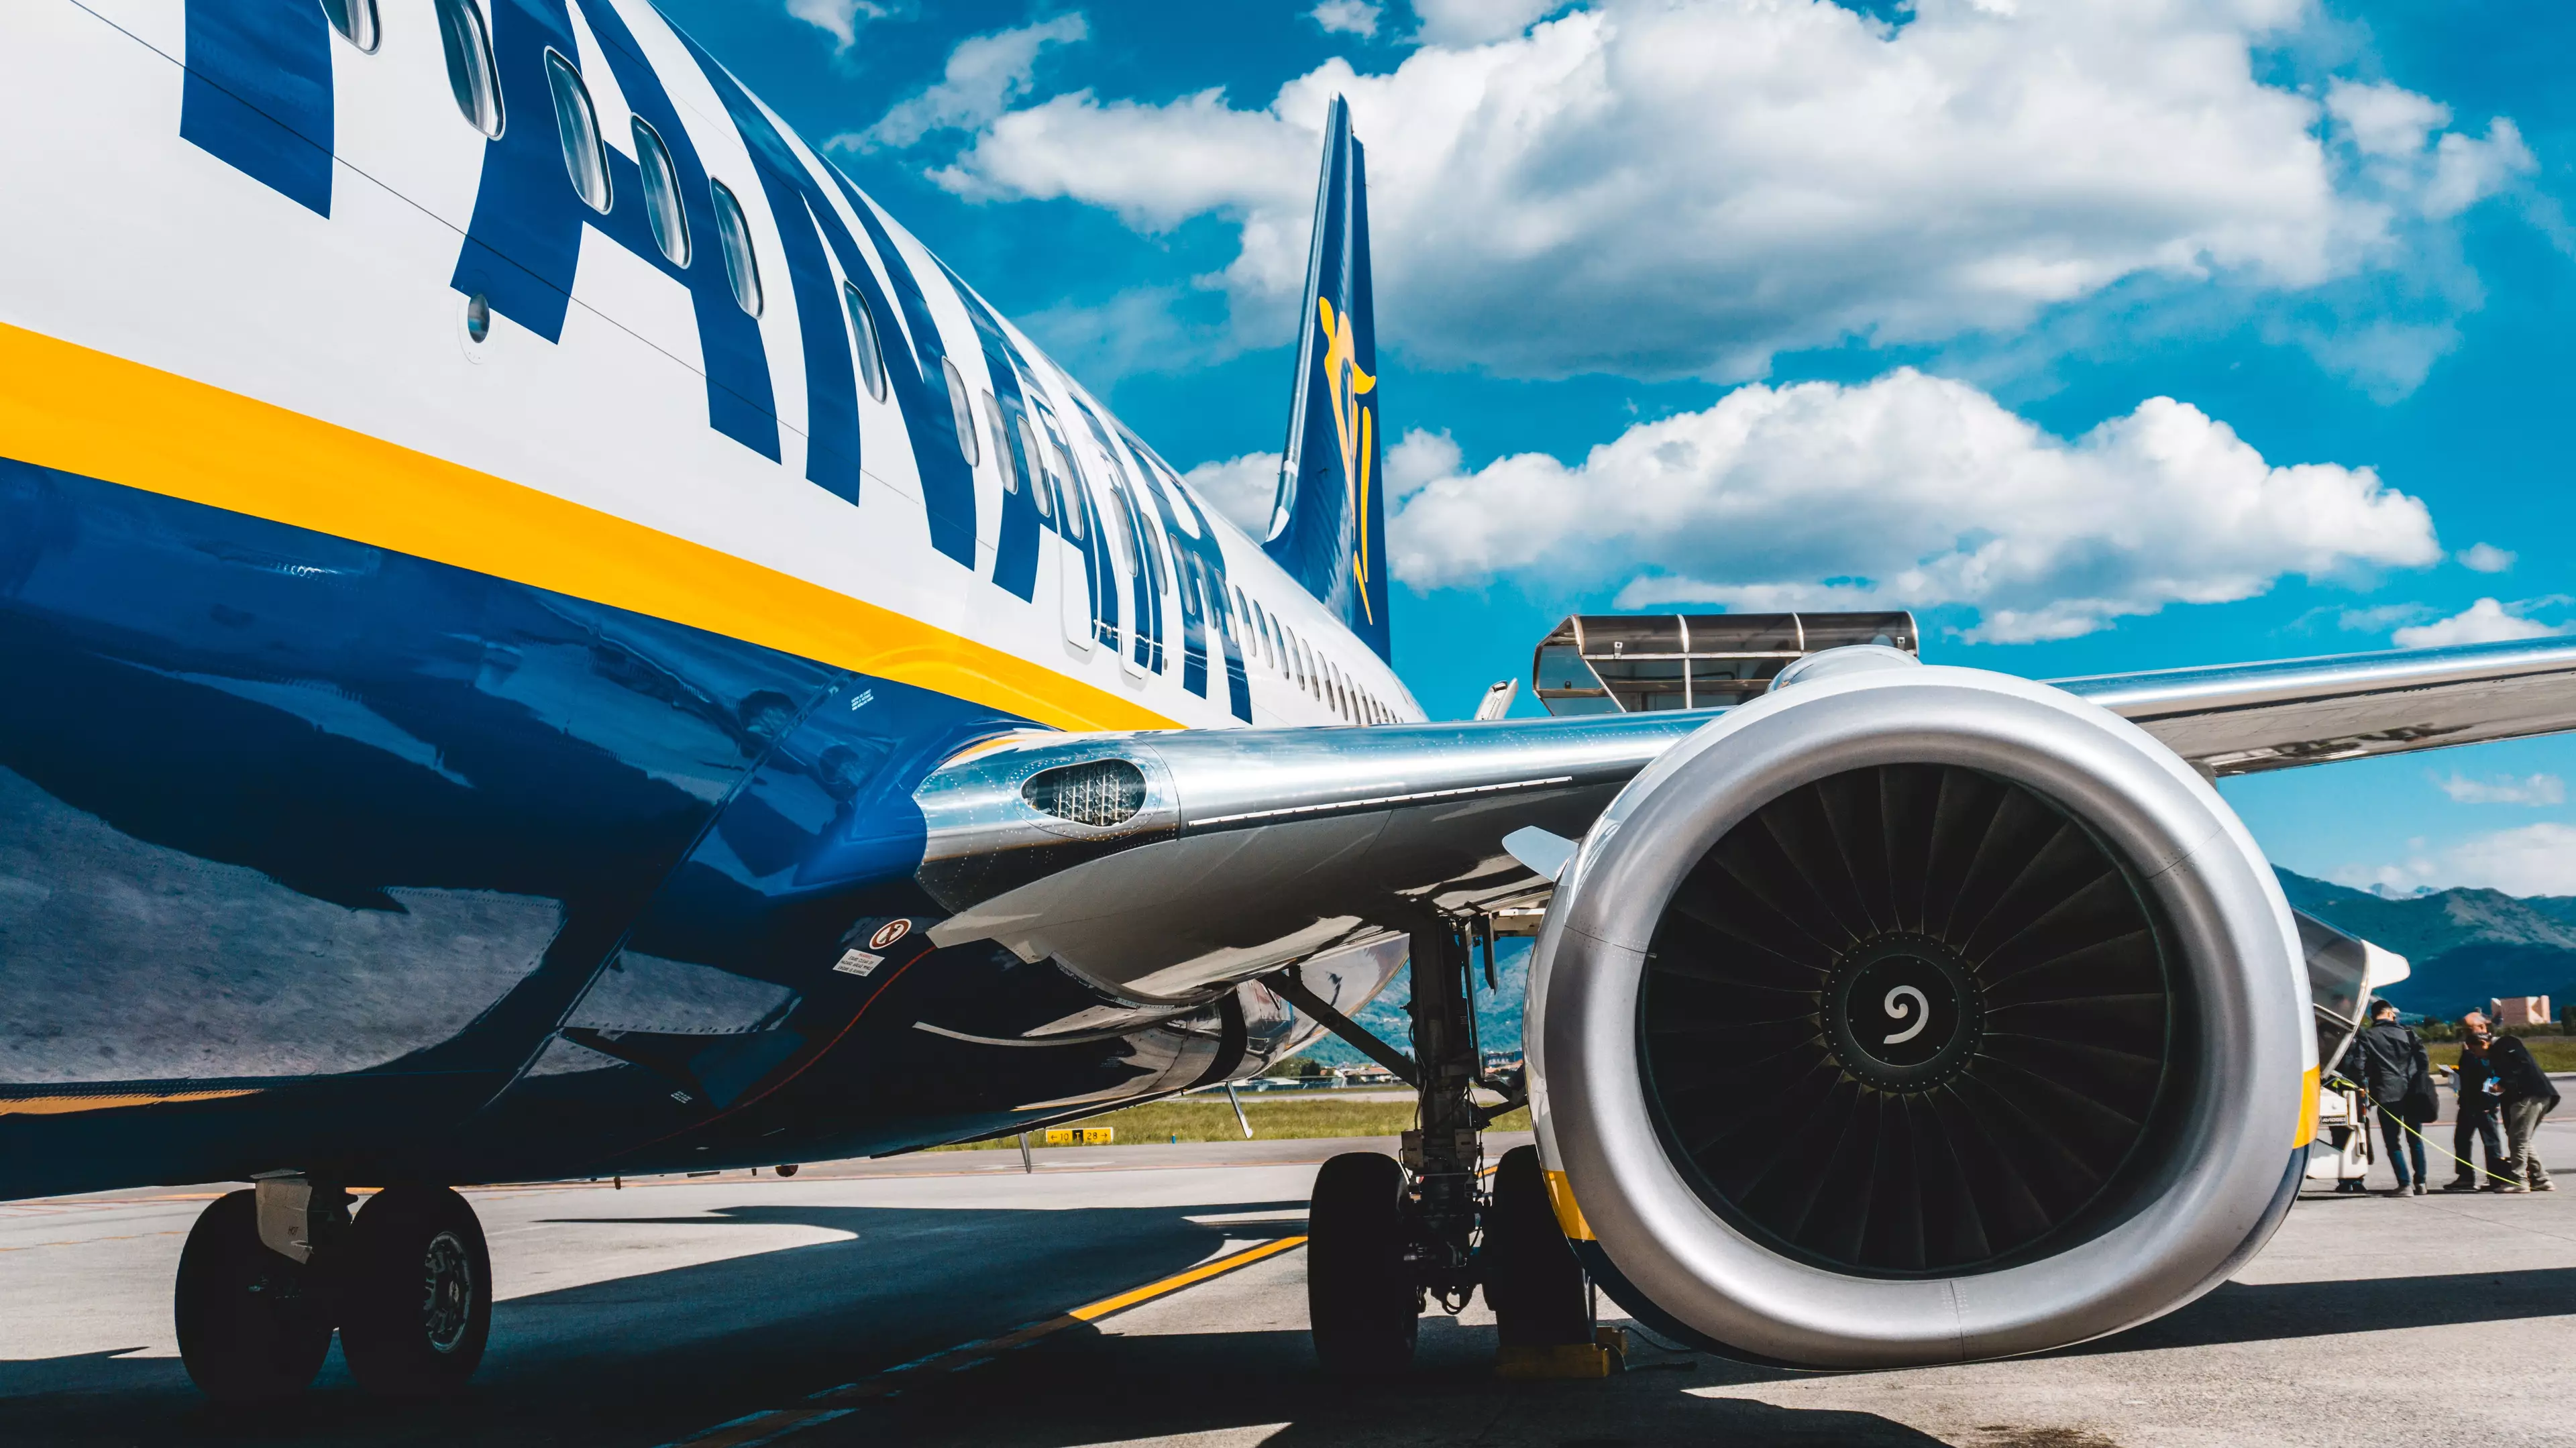 Ryanair Has Launched A Spring Sale With Flights Starting At £5